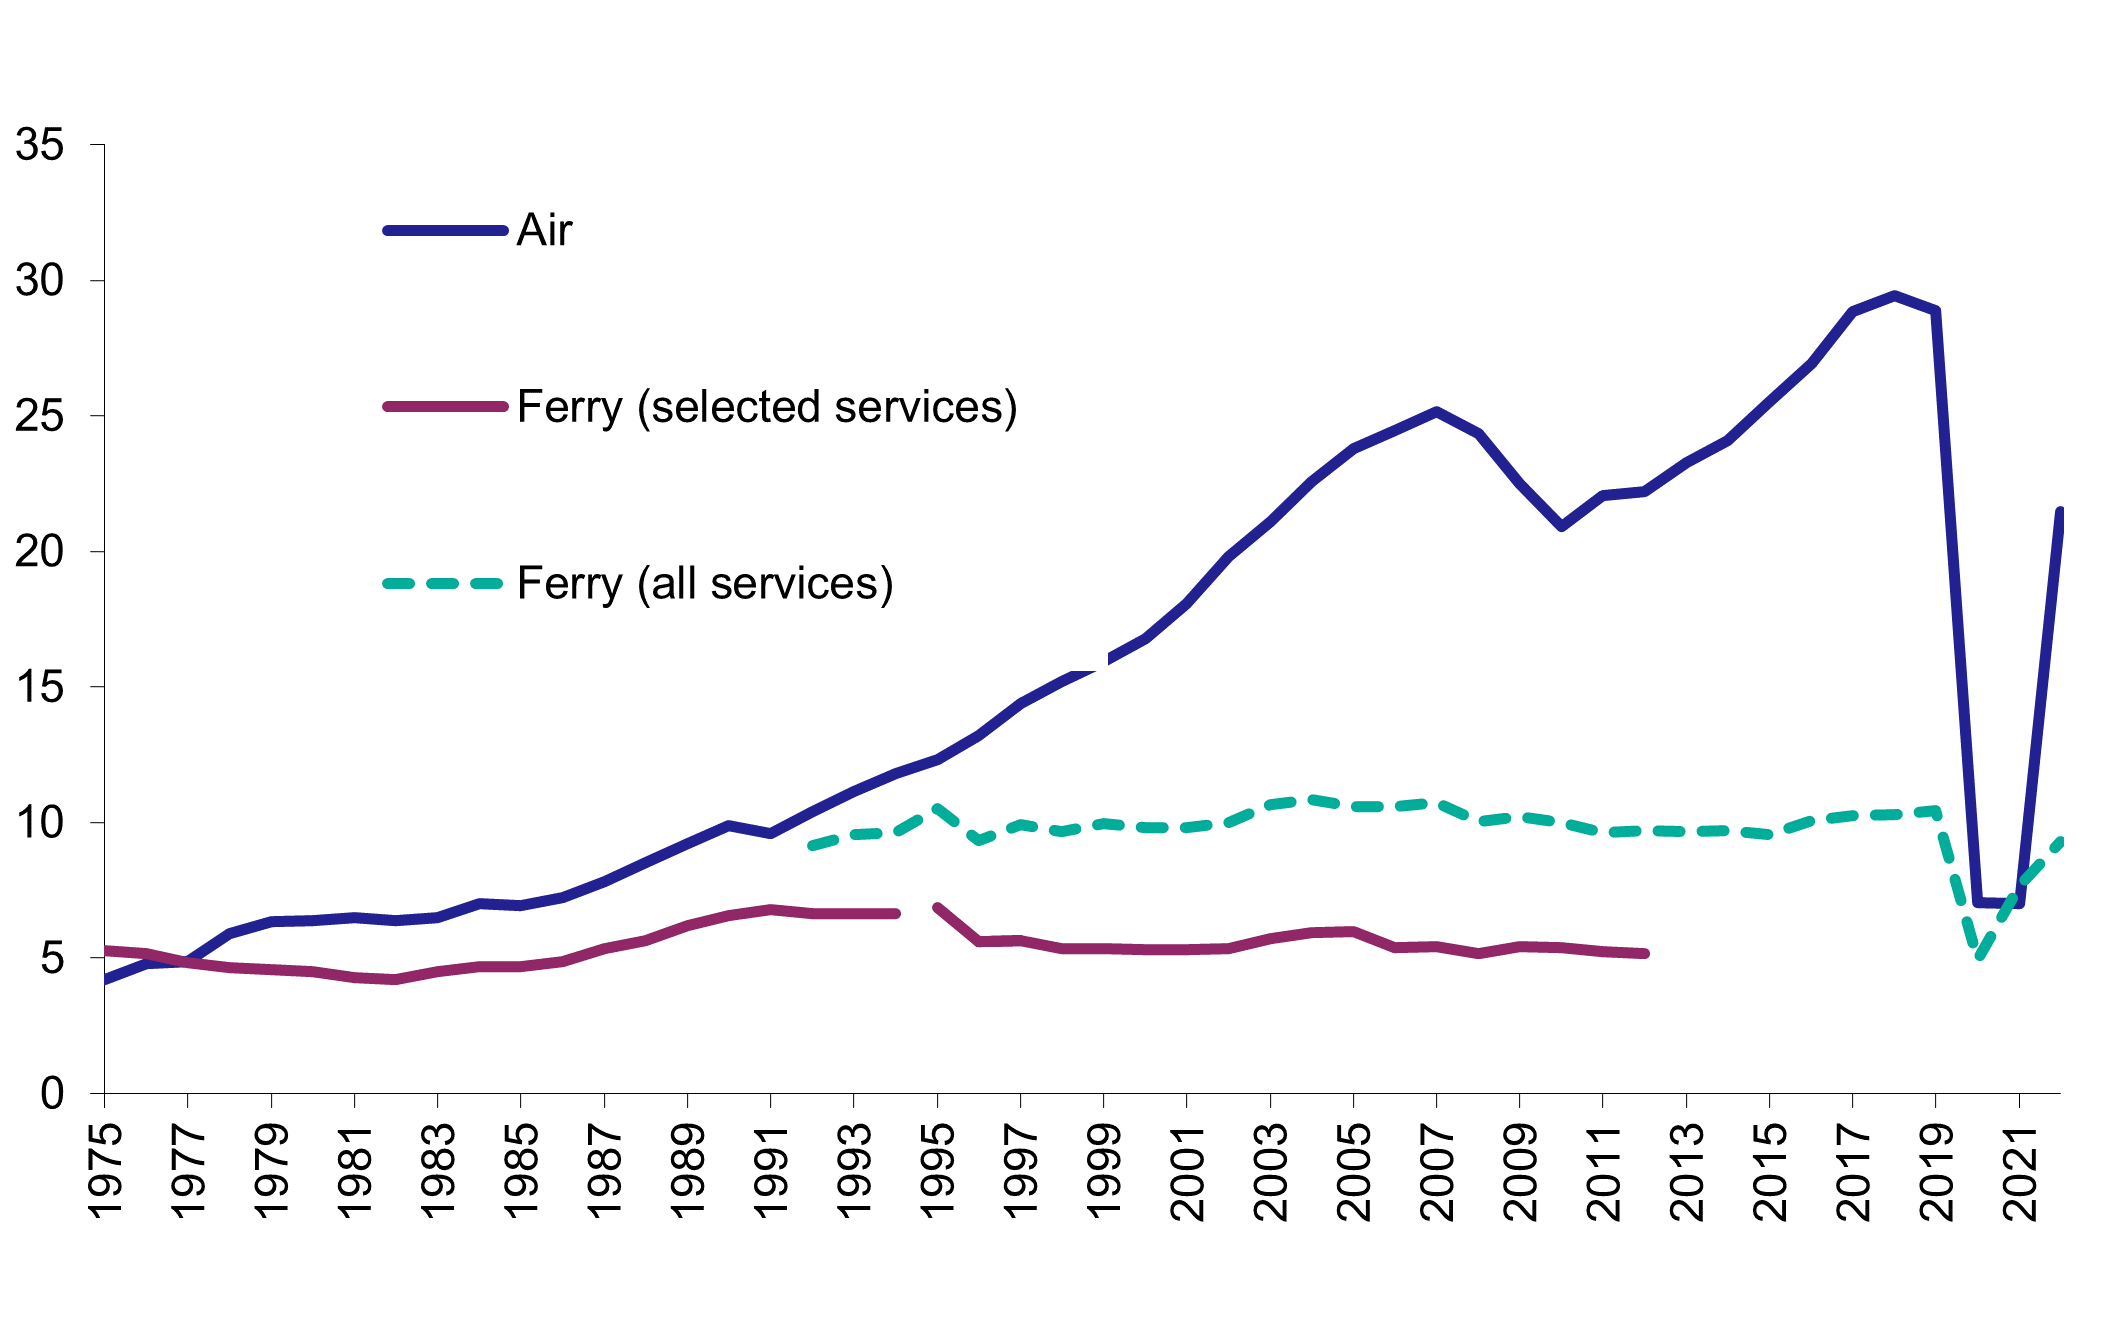 Figure 6: Air and ferry passenger numbers in Scotland, as described in text above